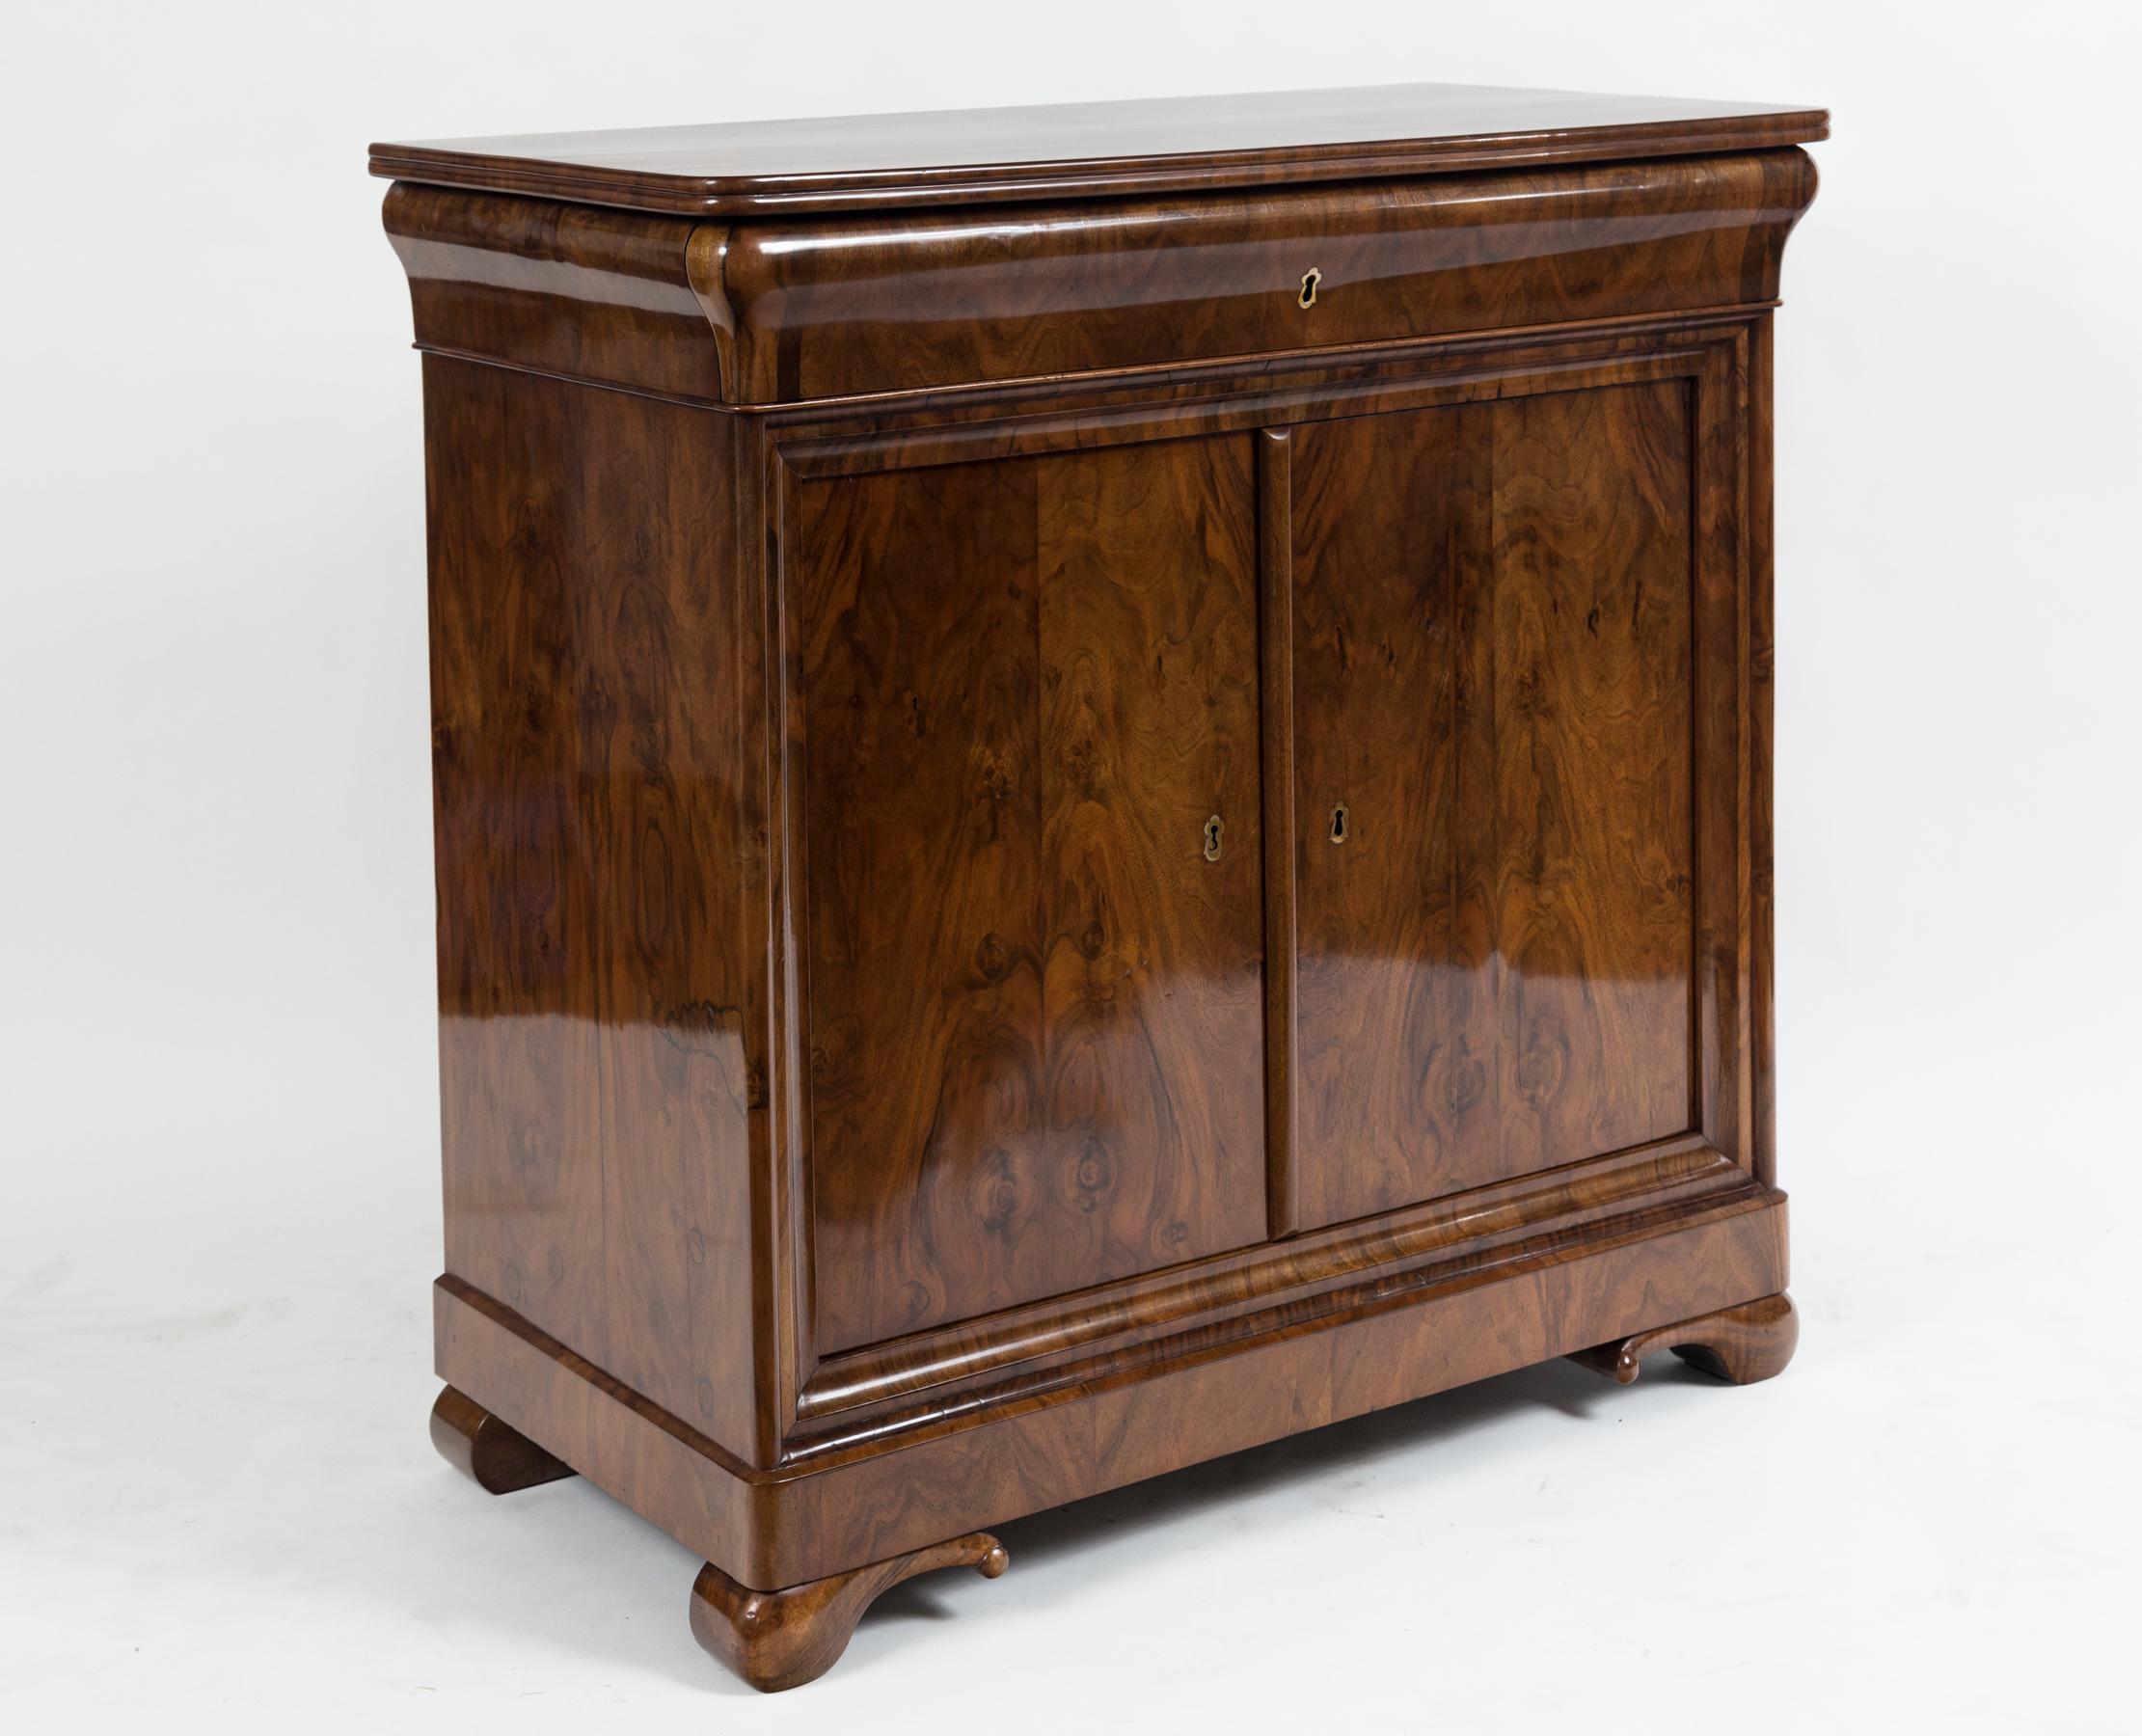 Pair of Sleek French Louis Philippe cabinets in walnut veneer comprised of wooden tops (not marble) a drawer with two doors, note concave drawer fronts
Origin: France
Date: 1830ca
Condition: Excellent, re-polished
Dimensions: 36” high, 36” wide,